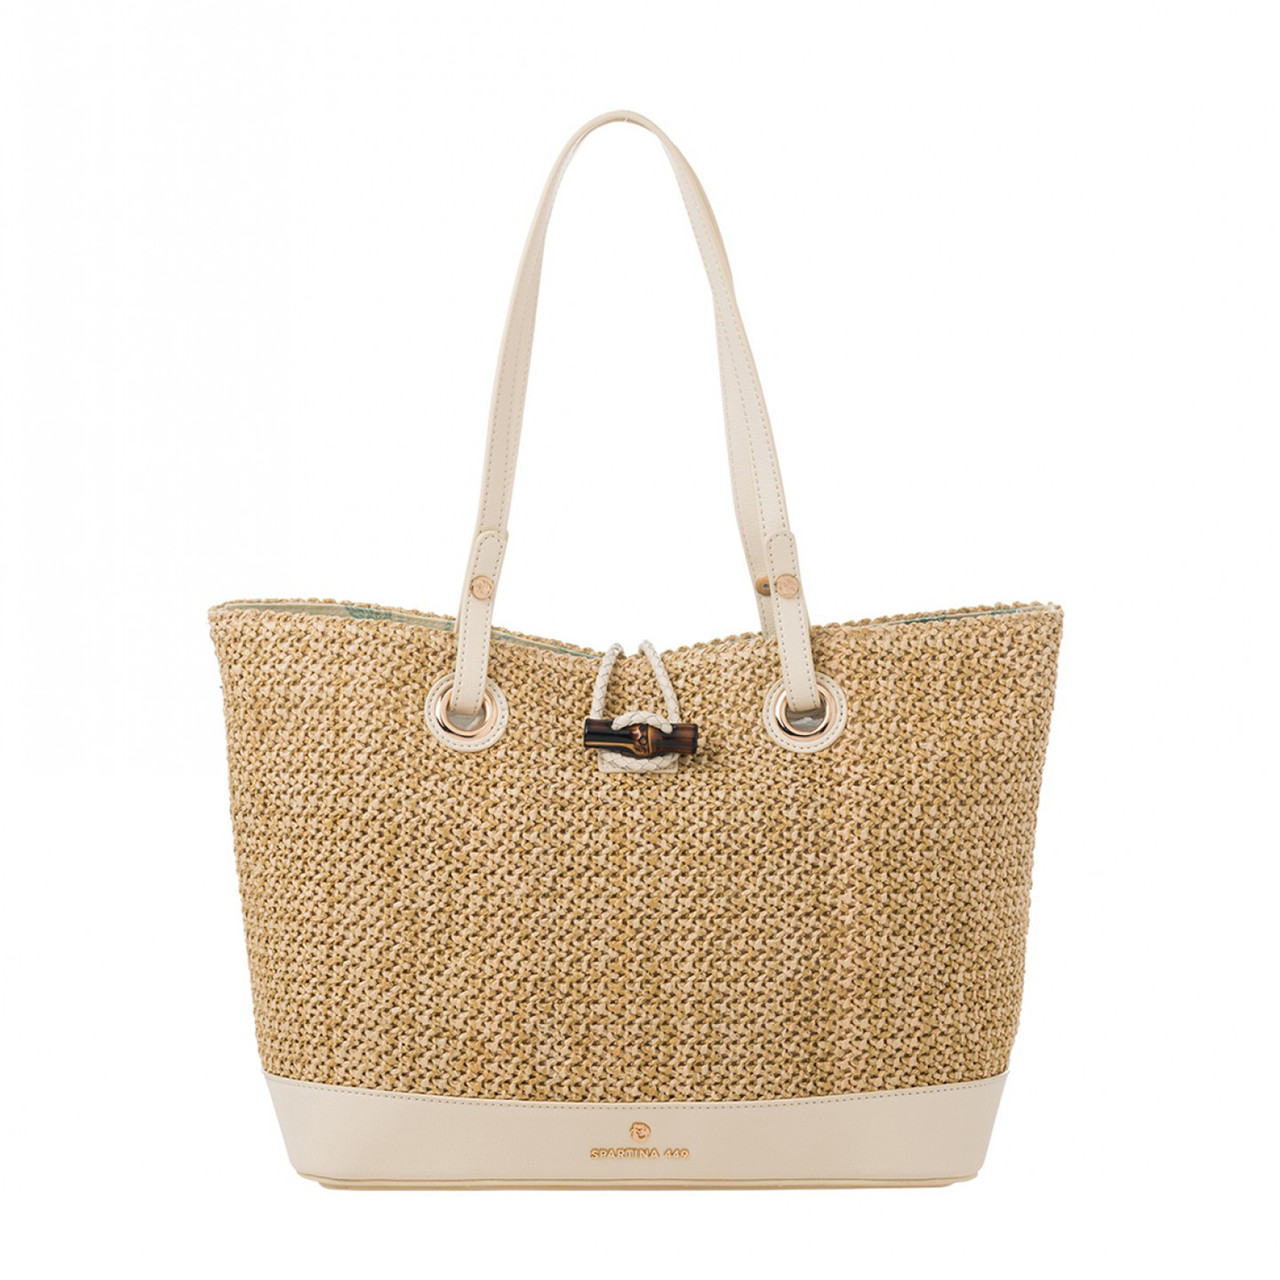 Spartina 449 Pearl Bamboo Chic Toggle Tote by Spartina 449-The Lamp Stand